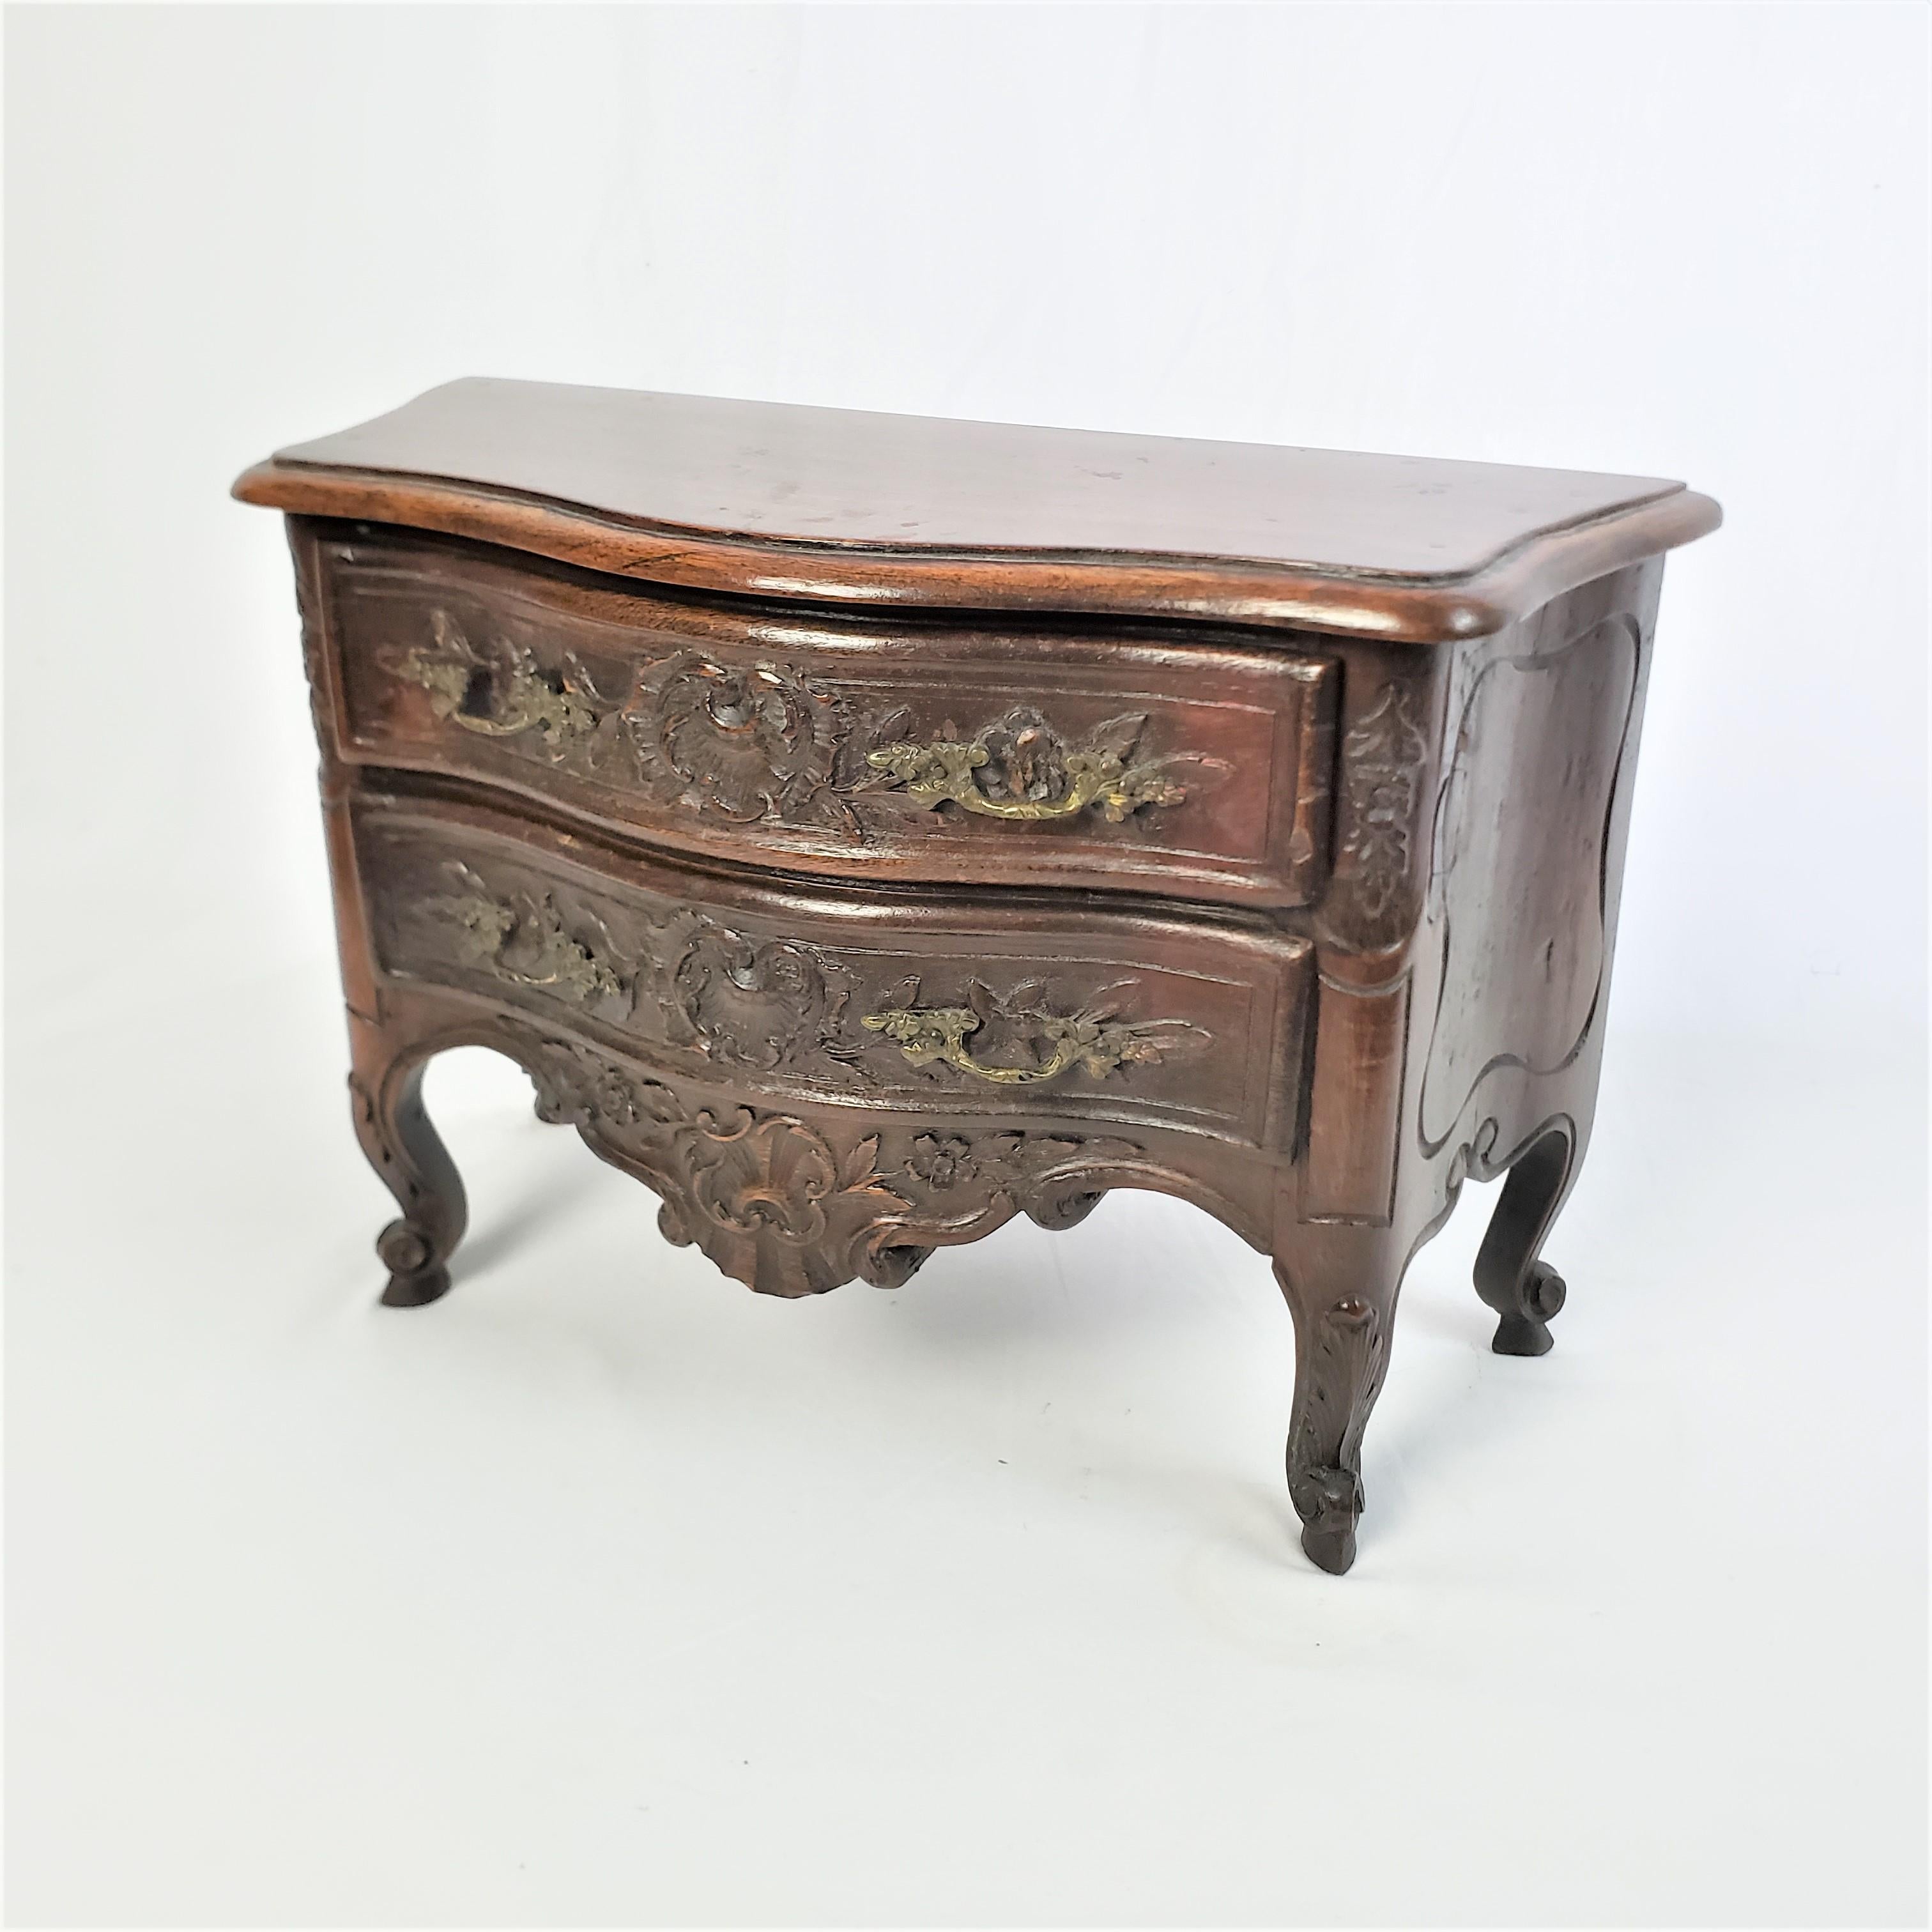 This miniature antique two drrawer dresser is unsigned, but presumed to have originated from France and date to approximately 1850 and done in the period Louis XV style. The dresser is composed of walnut with a serpentine shaped from with carved